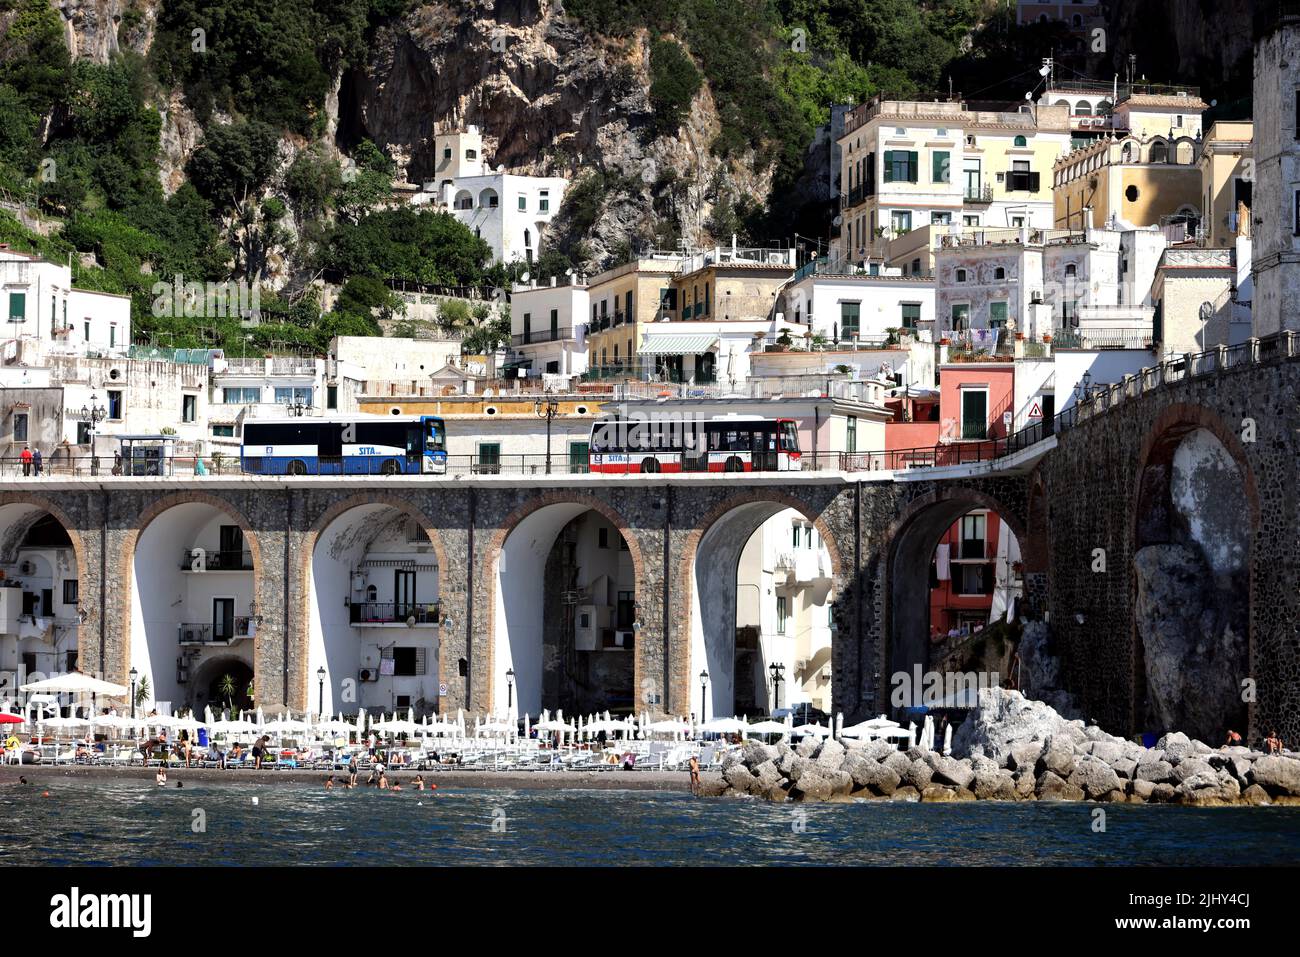 Amalfi coast Italy  picture by Gavin Rodgers/ Pixel8000 Stock Photo